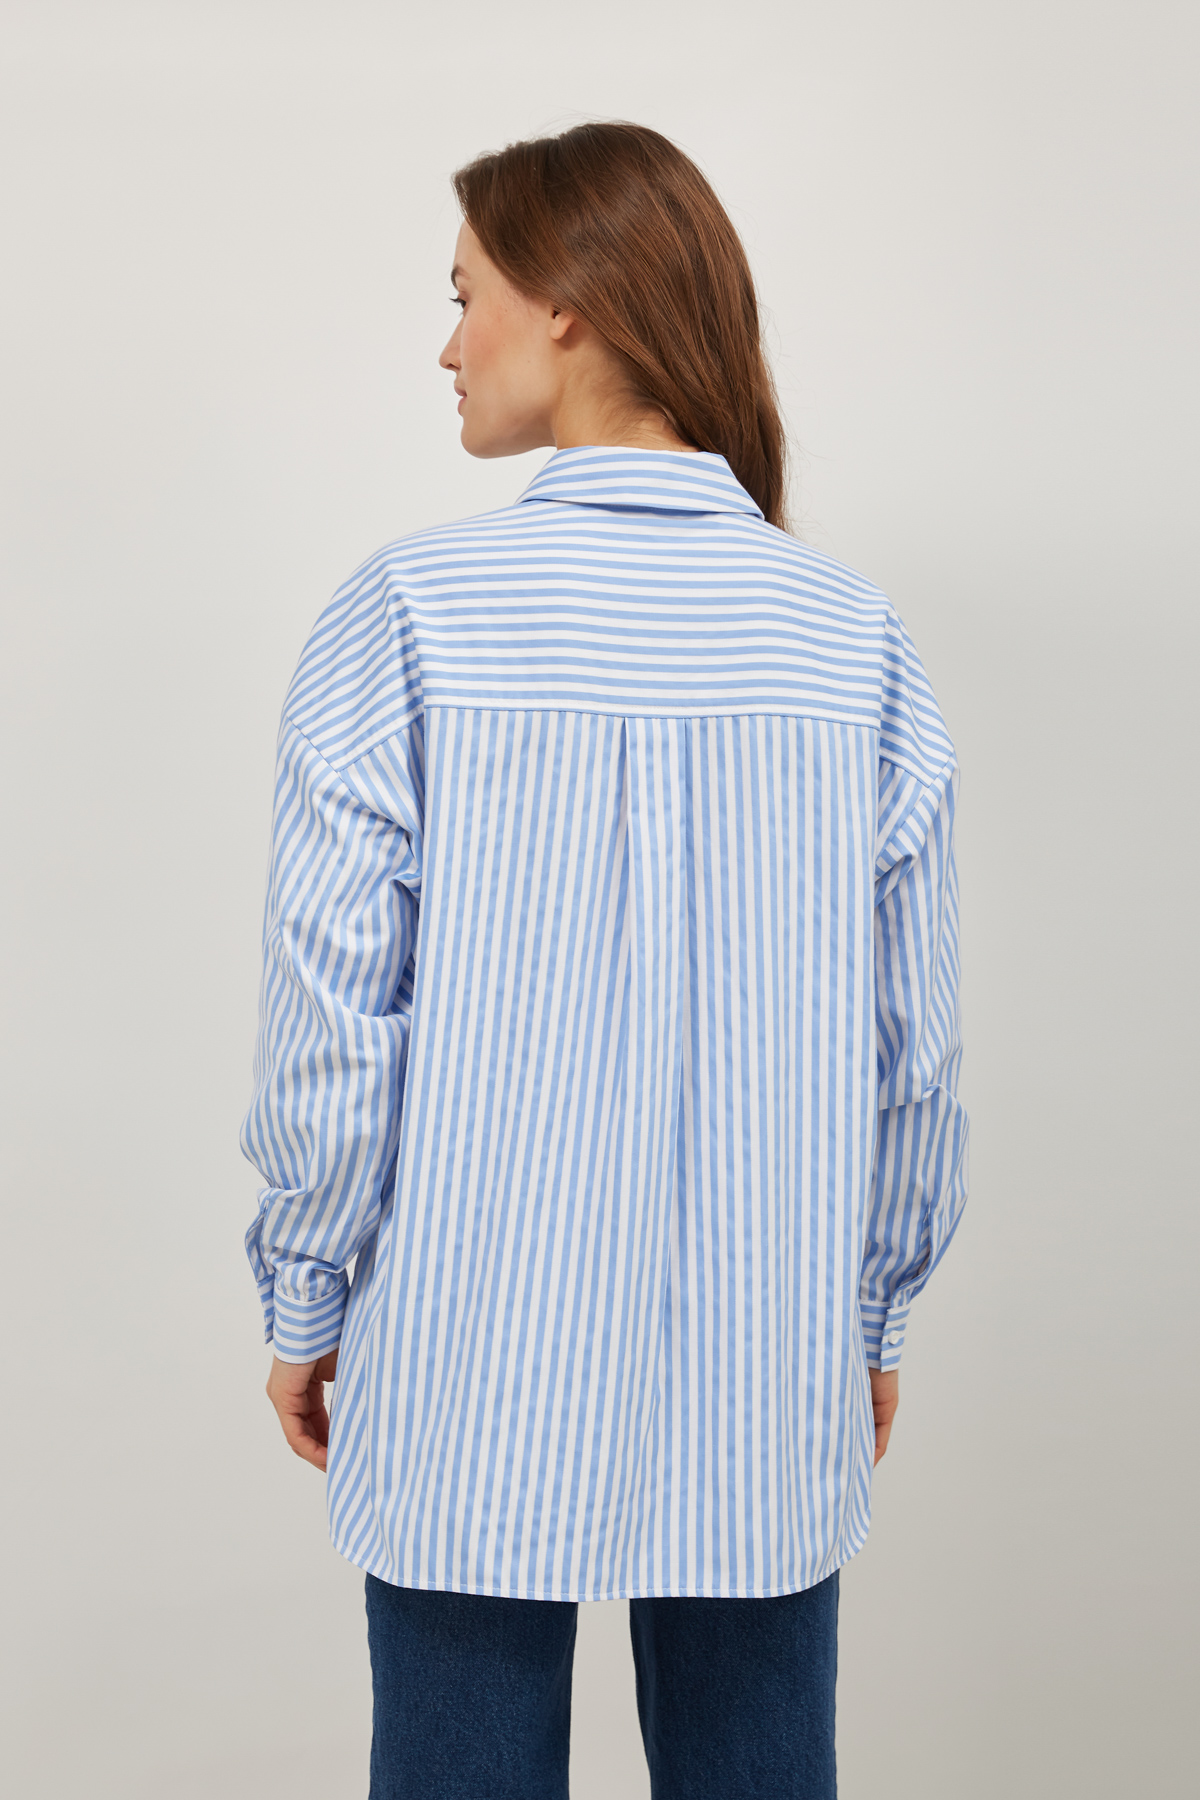 Loose fit shirt in white-blue stripe, photo 3